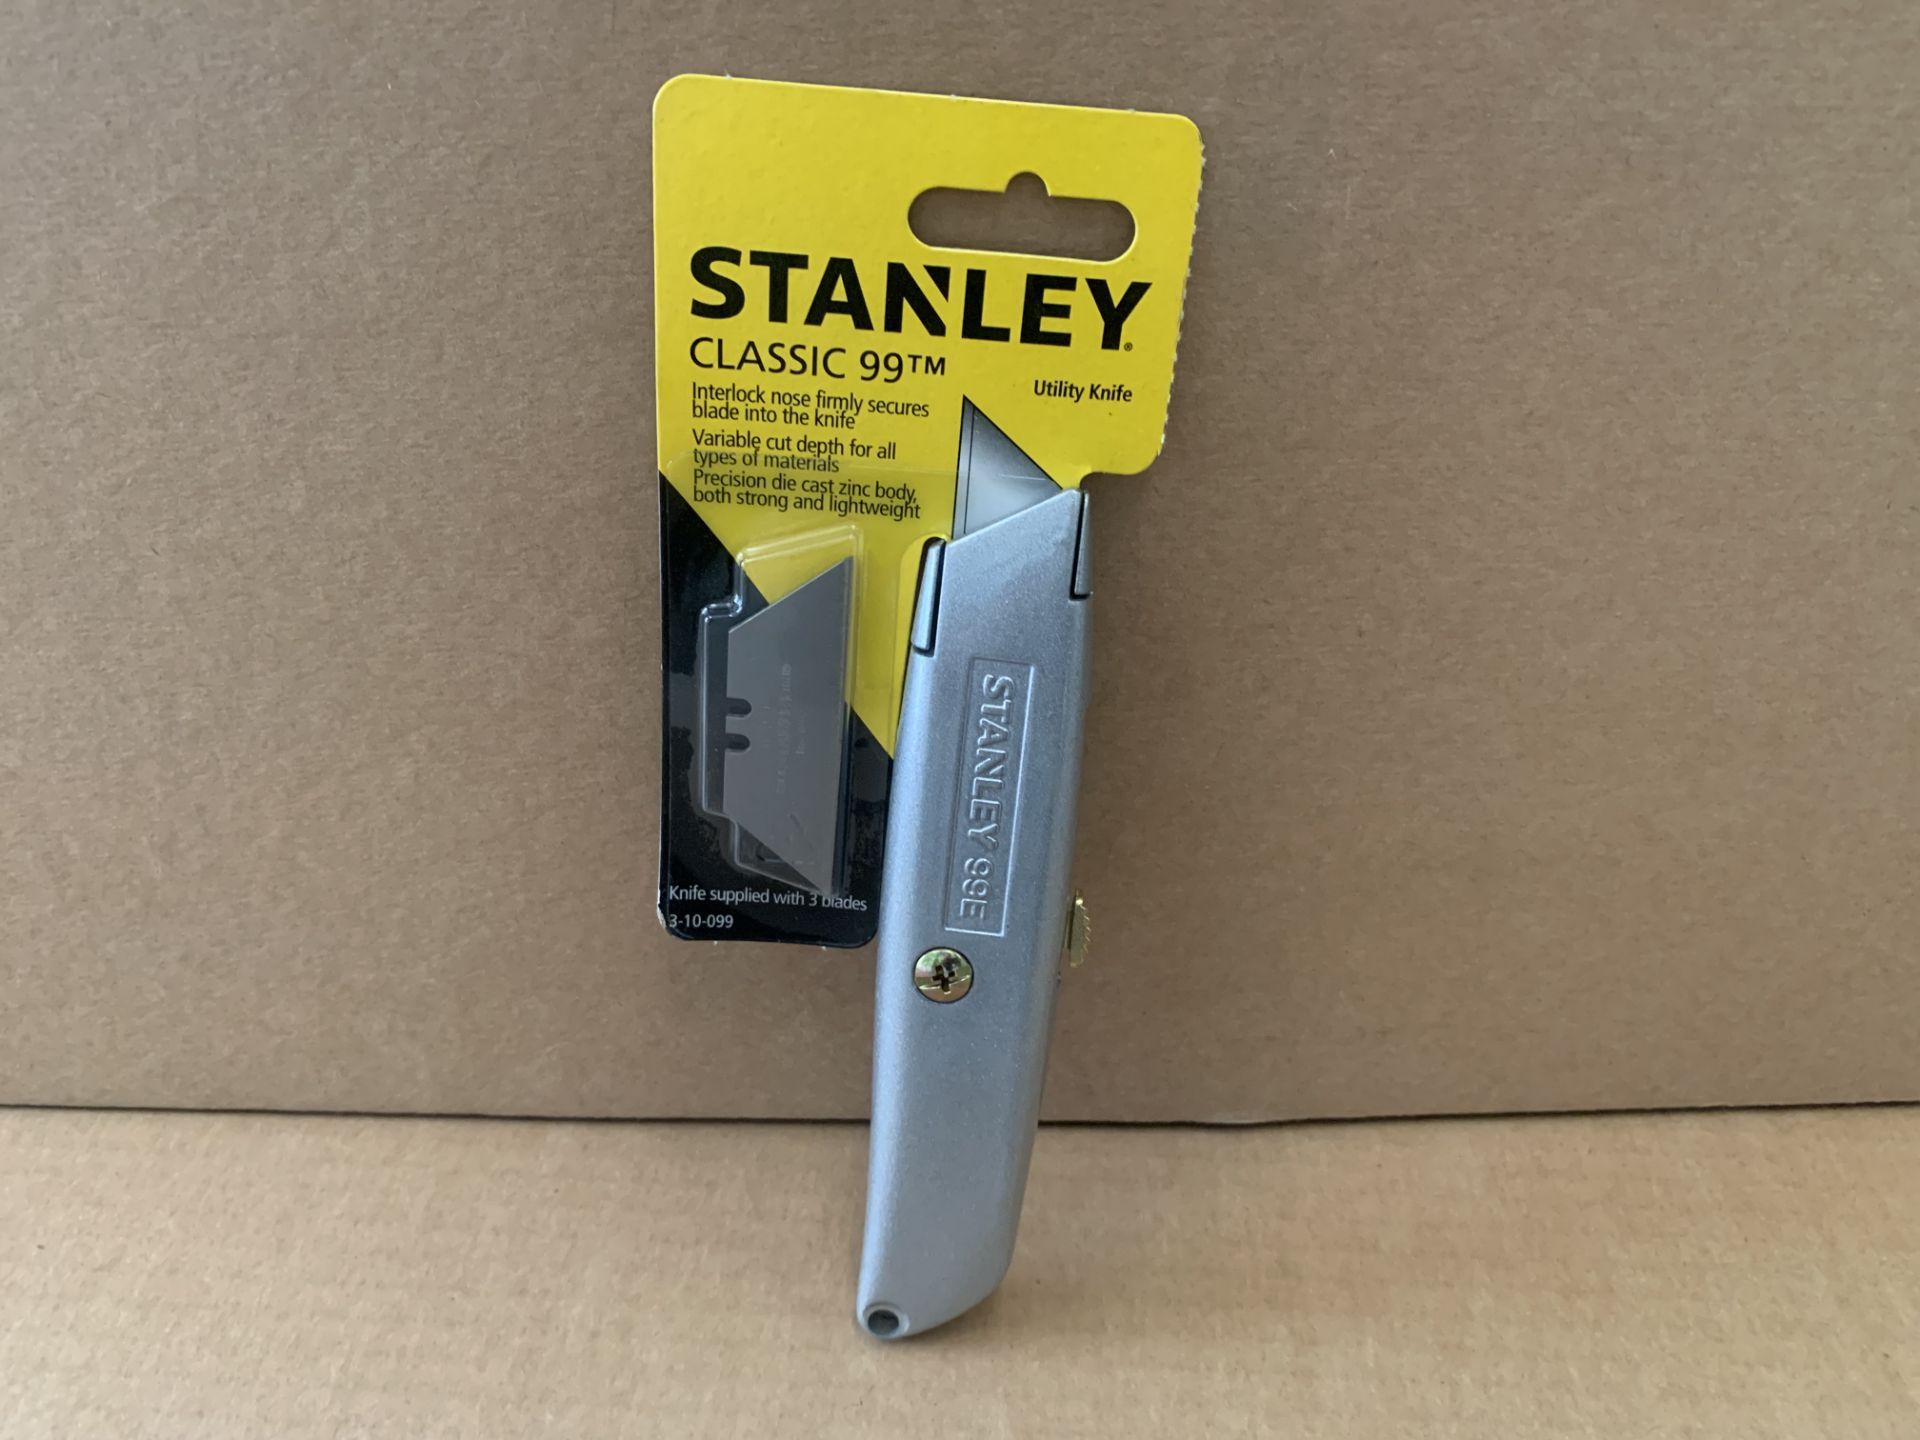 12 X BRAND NEW CLASSIC 99 STANLEY KNIVES WITH BLADE REPLACEMENTS (1289/15)